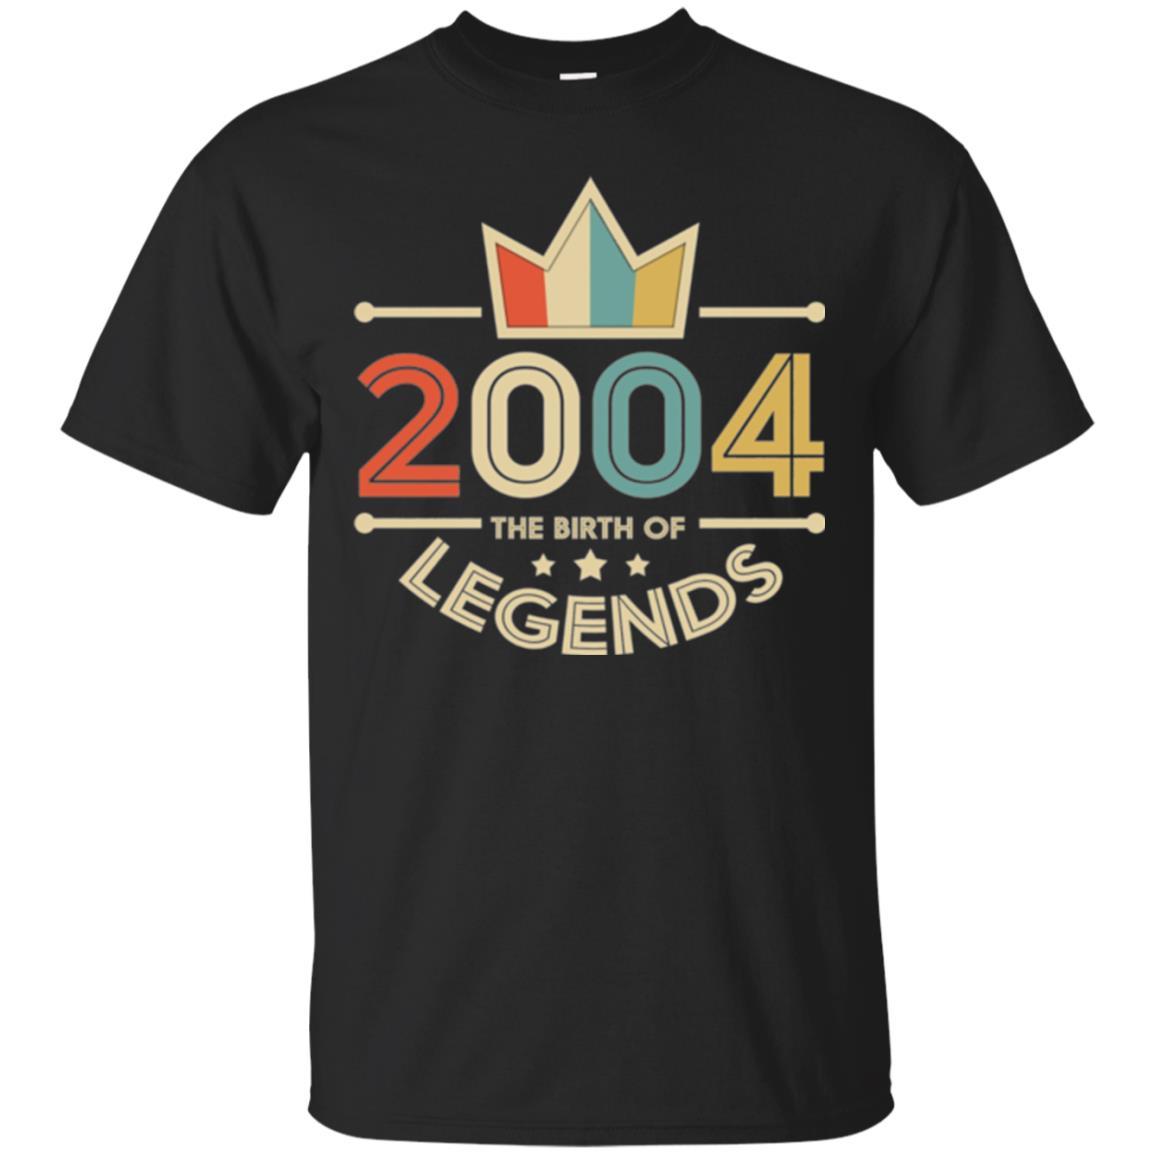 Christmas T-shirt Vintage 2004 The Birth Of Legends